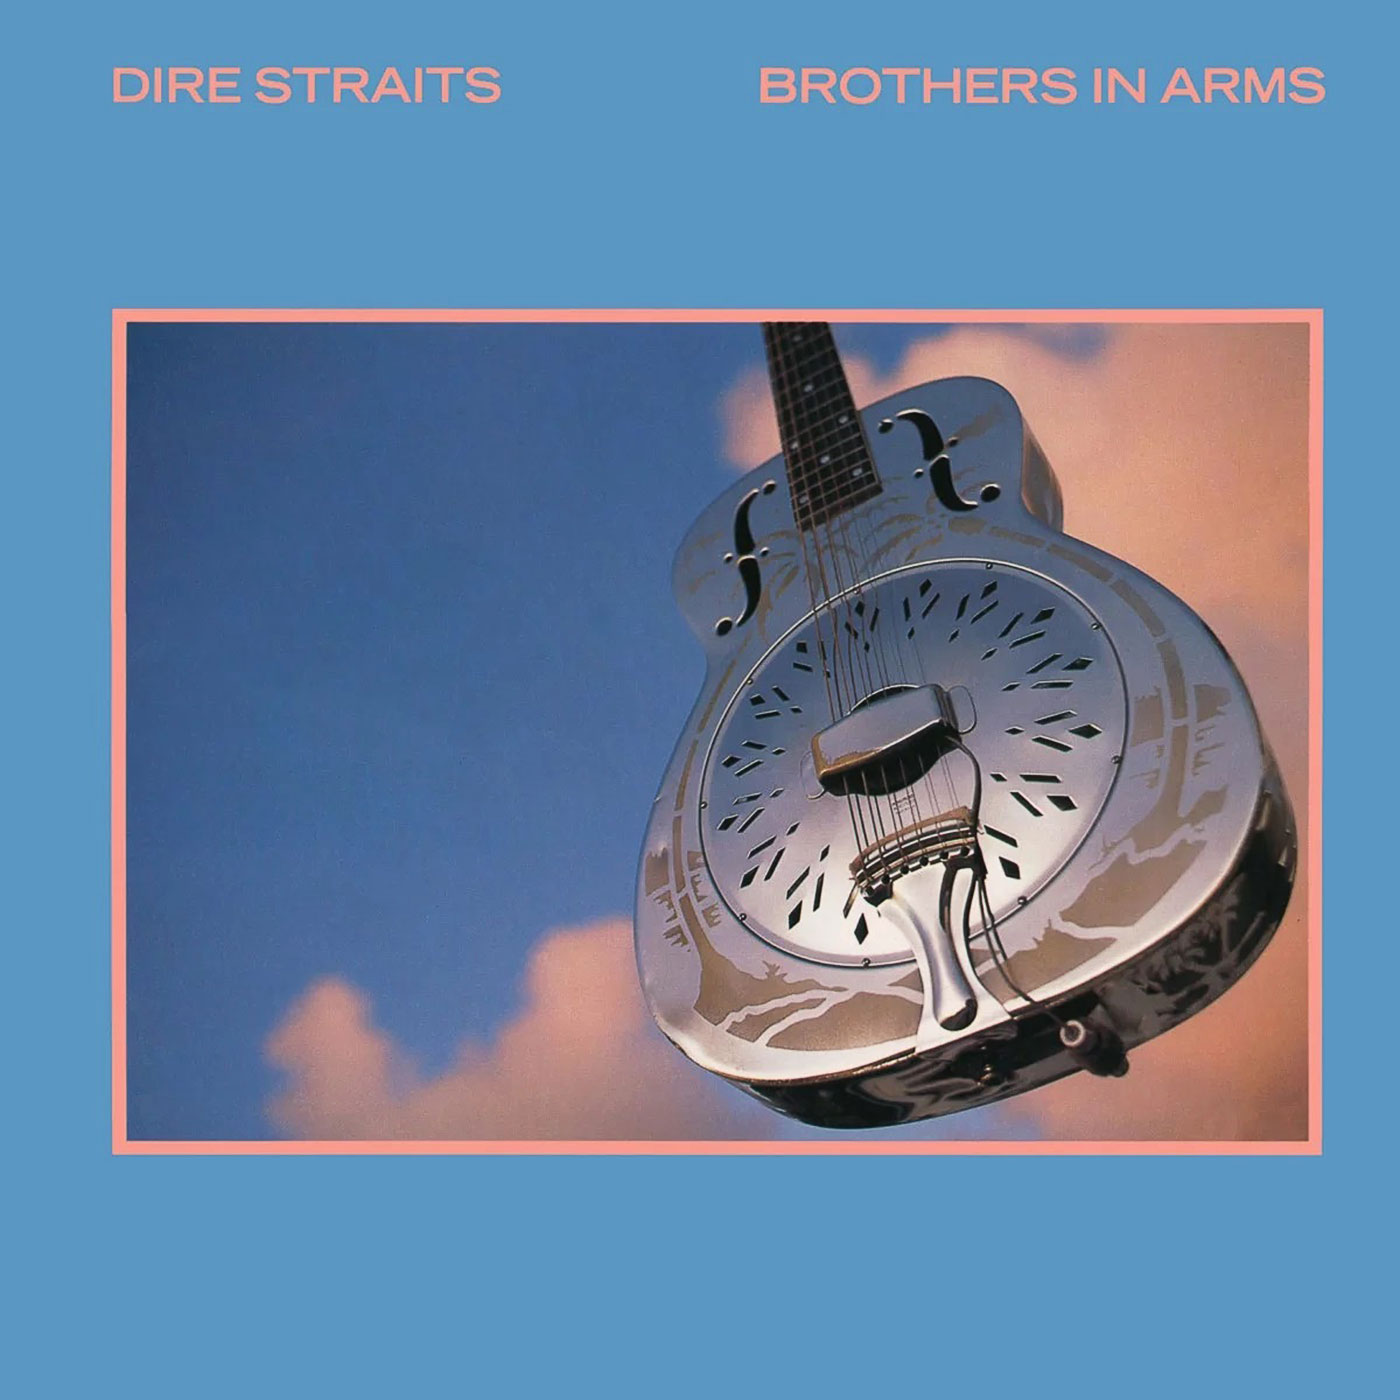 551 Dire Straits – Brothers in Arms